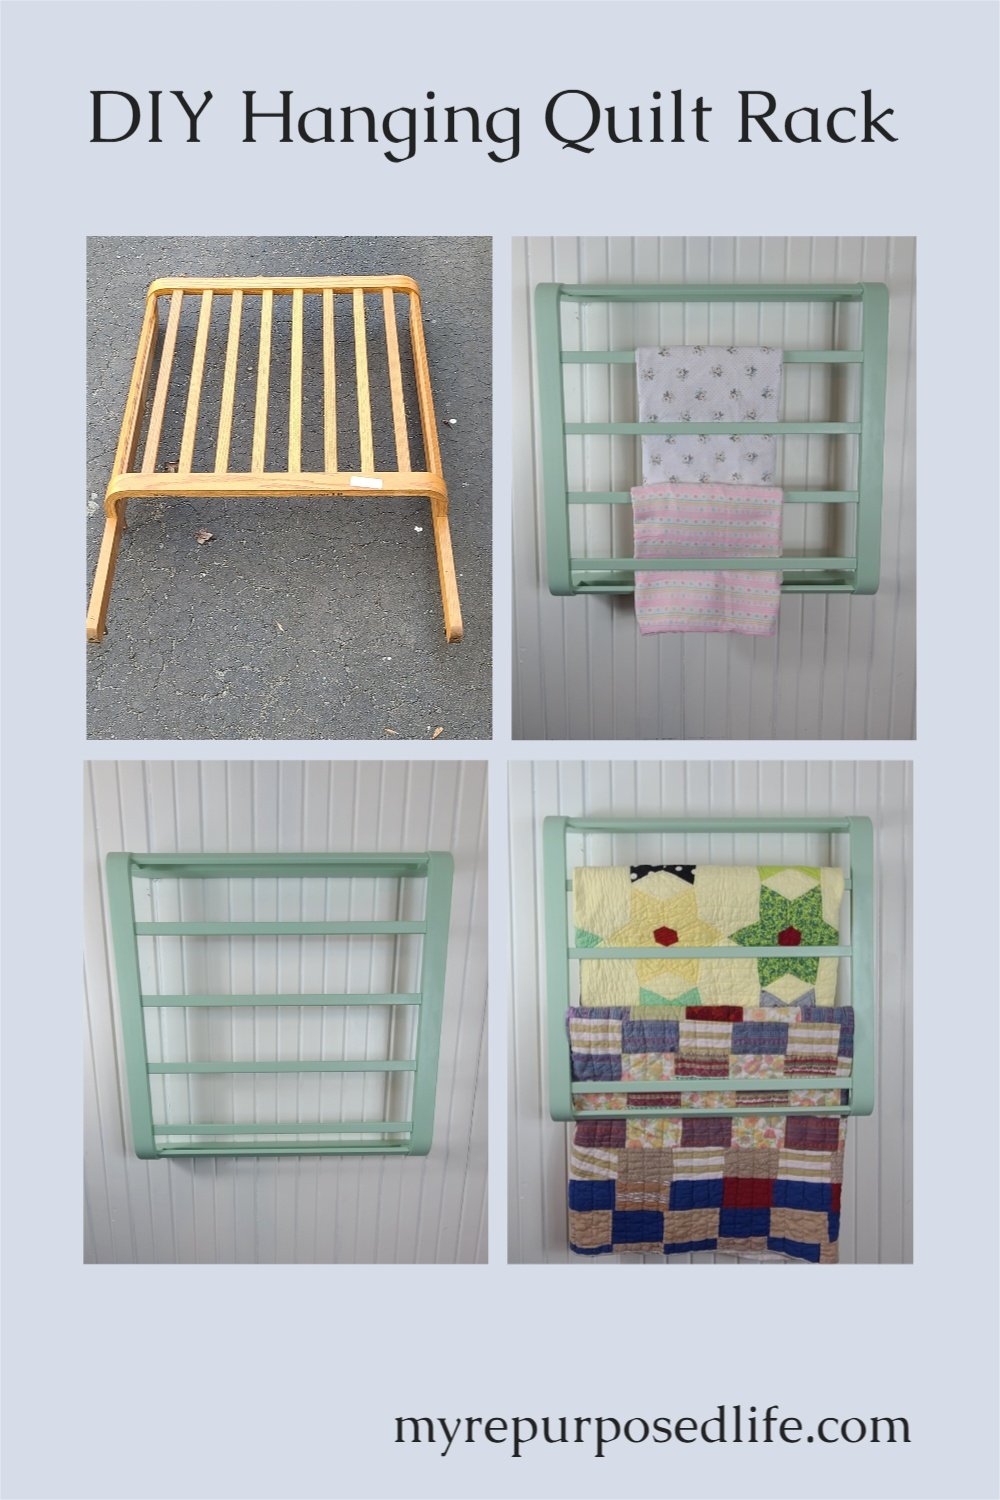 How to make a wood wall mounted quilt rack using an upcycled crib end. Step by step details and ideas to use the quilt rack for other purposes. #MyRepurposedLife #repurposed #upcycle #crib #wood #quiltrack #blanketrack #baby #nursery via @repurposedlife